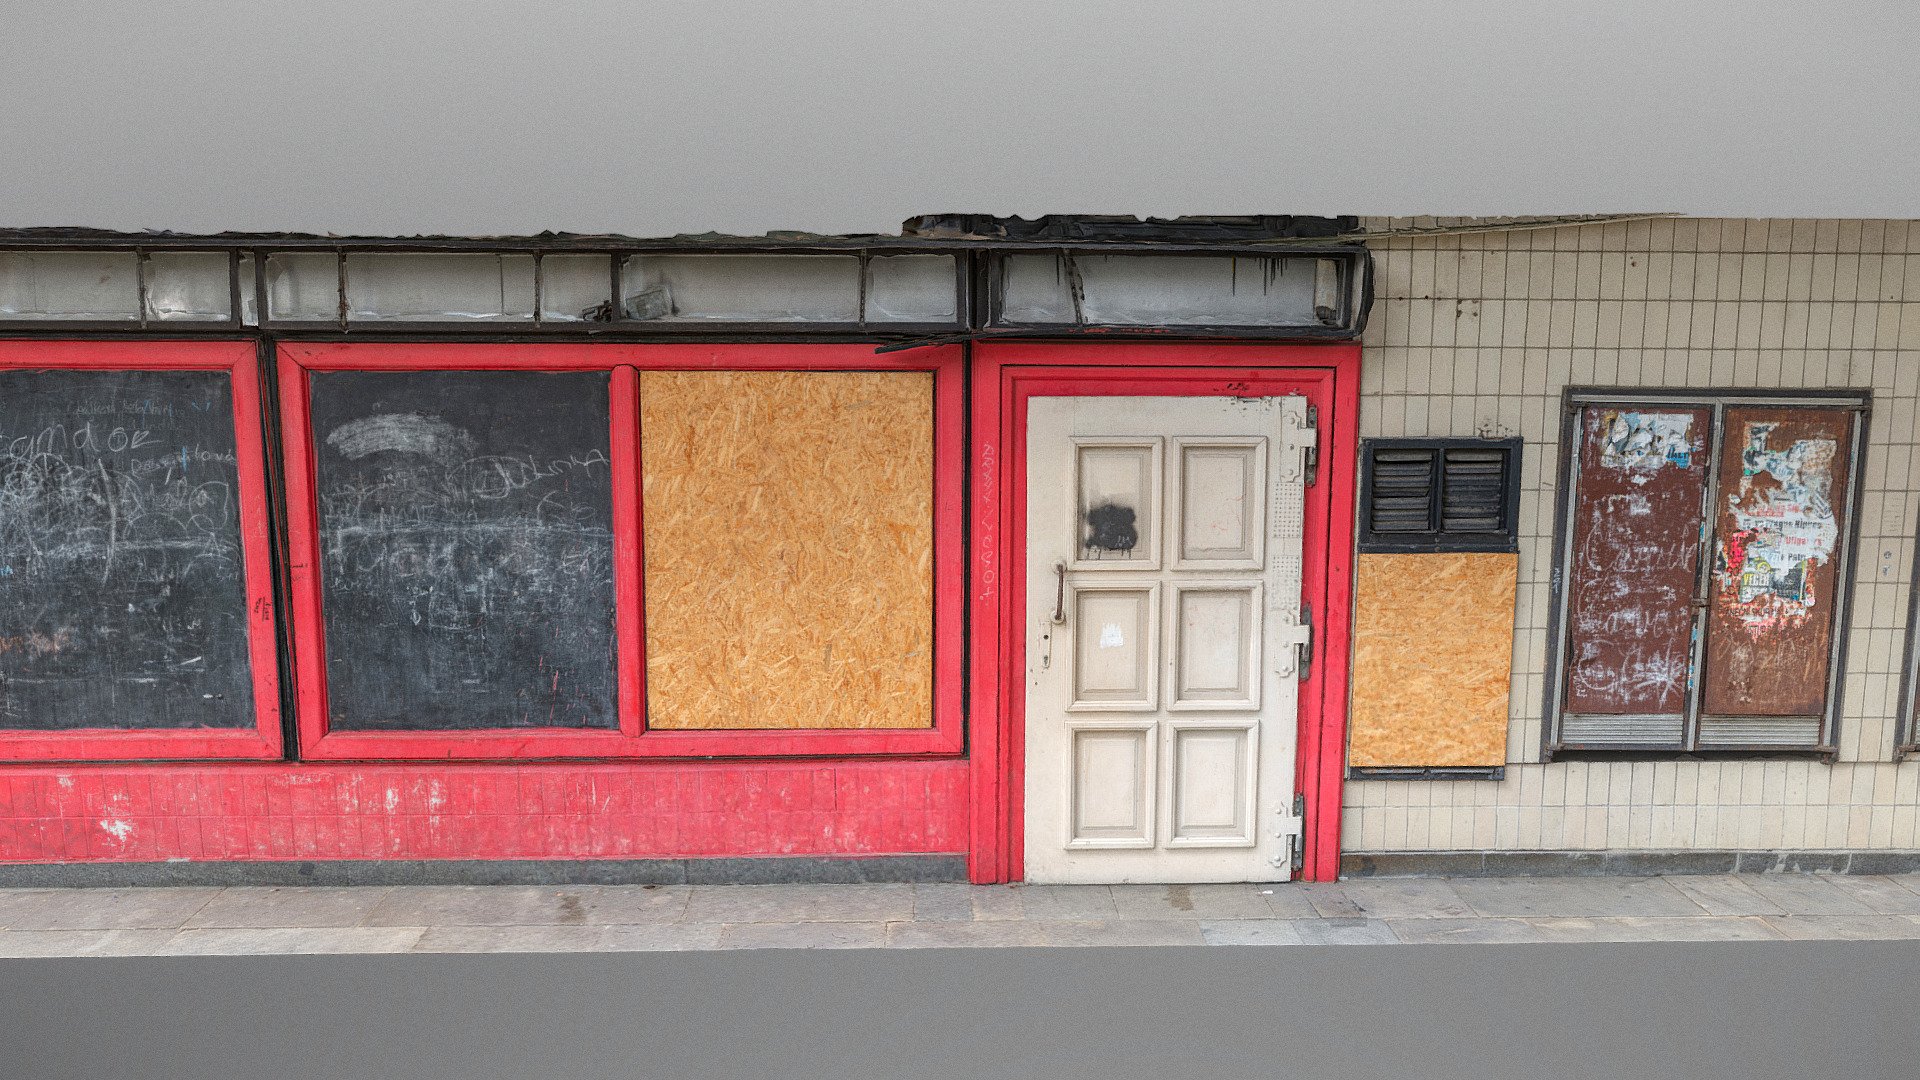 Stylish retro grunge punk 90's Pub restaurant bar store front facade alley with boarded up windows and chalkboard writings

photogrammetry scan (250x24mp), 3x16k textures + normals from 2m tris - Pub front facade - Buy Royalty Free 3D model by matousekfoto 3d model